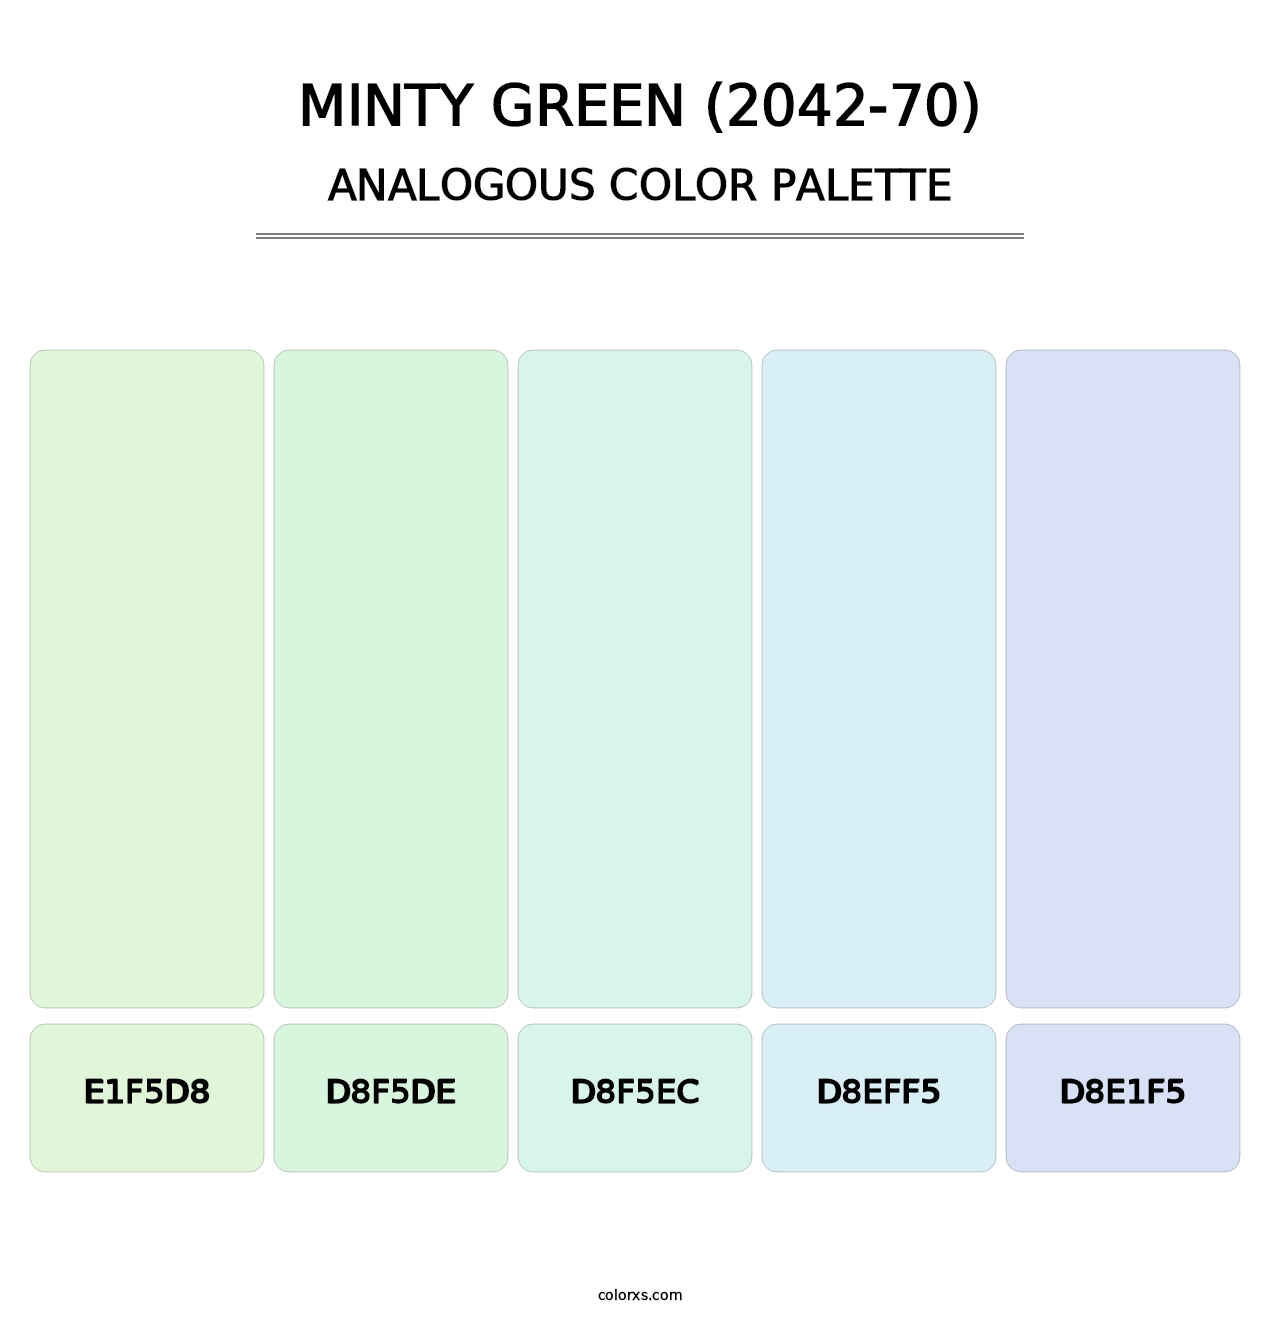 Minty Green (2042-70) - Analogous Color Palette